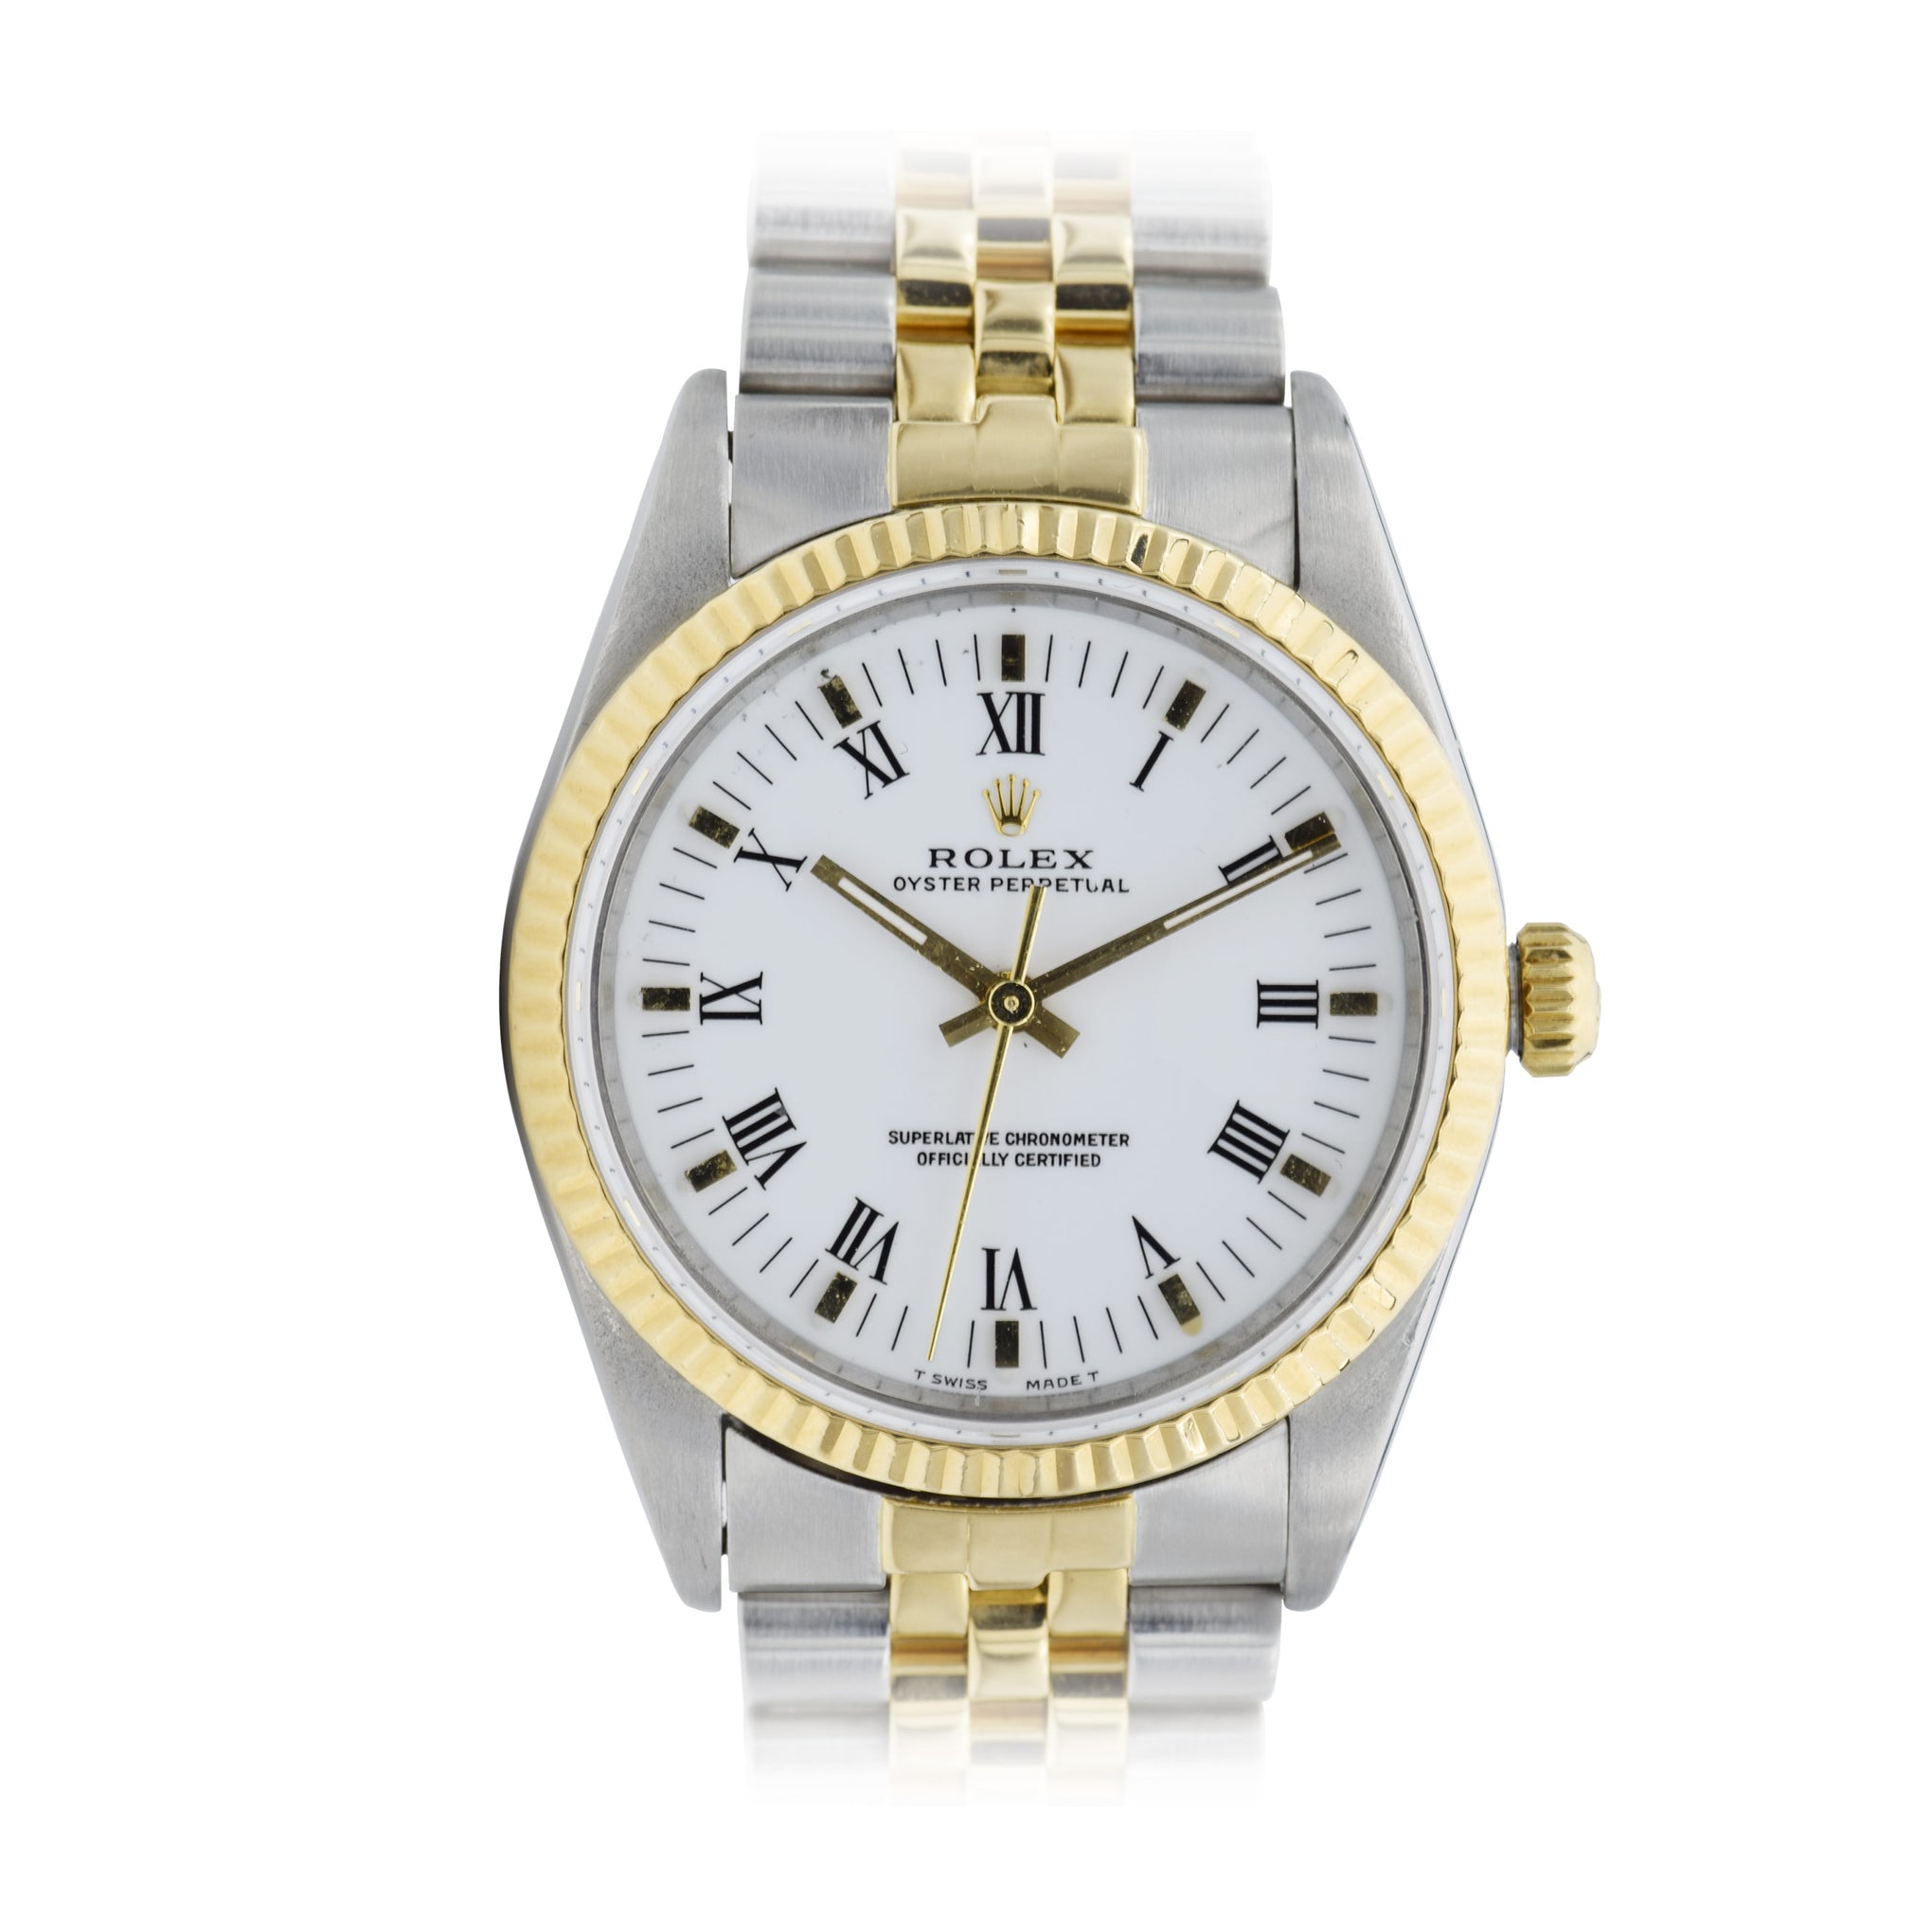 Rolex Oyster Perpetual 14233